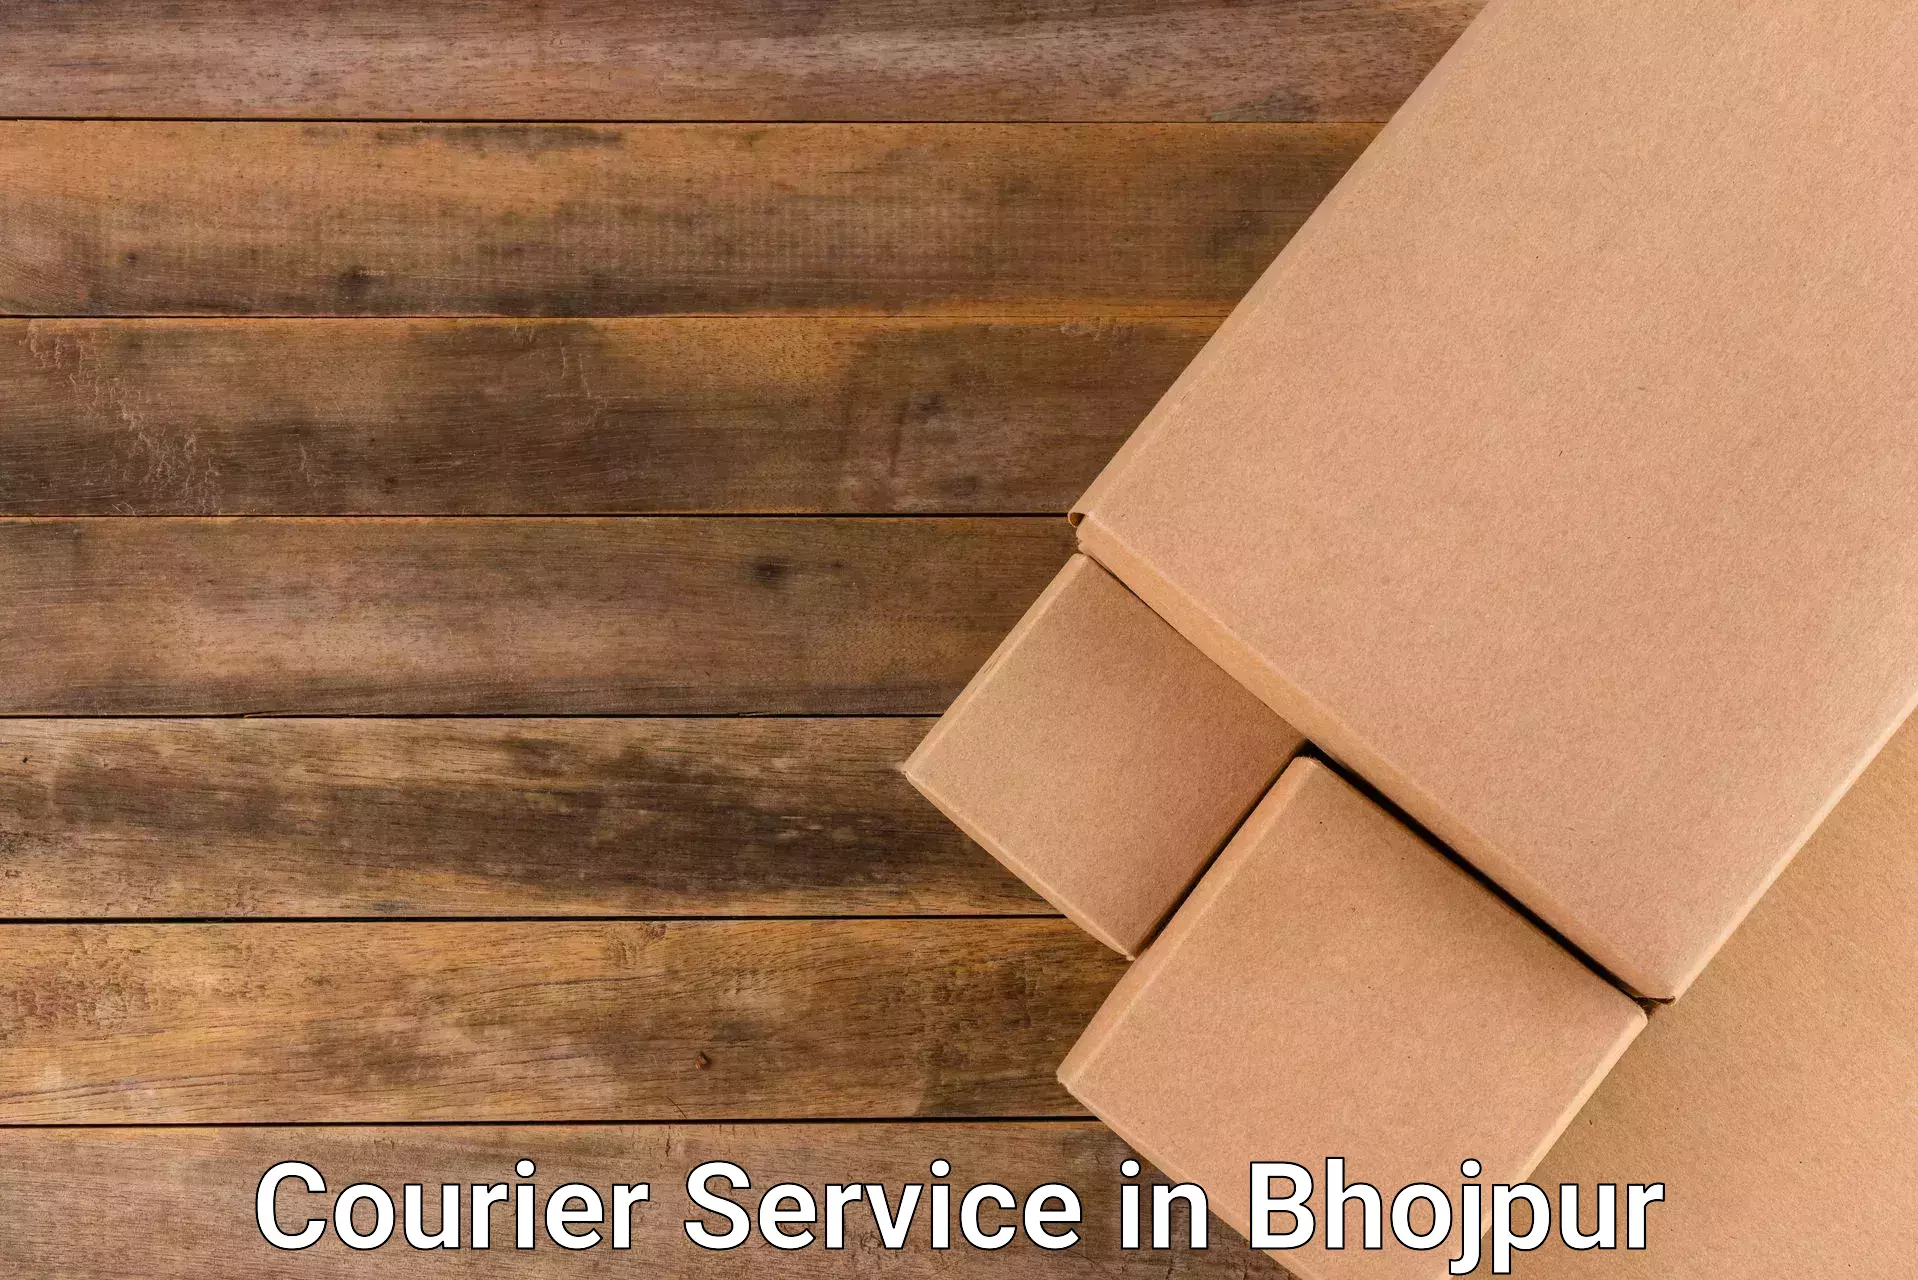 On-call courier service in Bhojpur